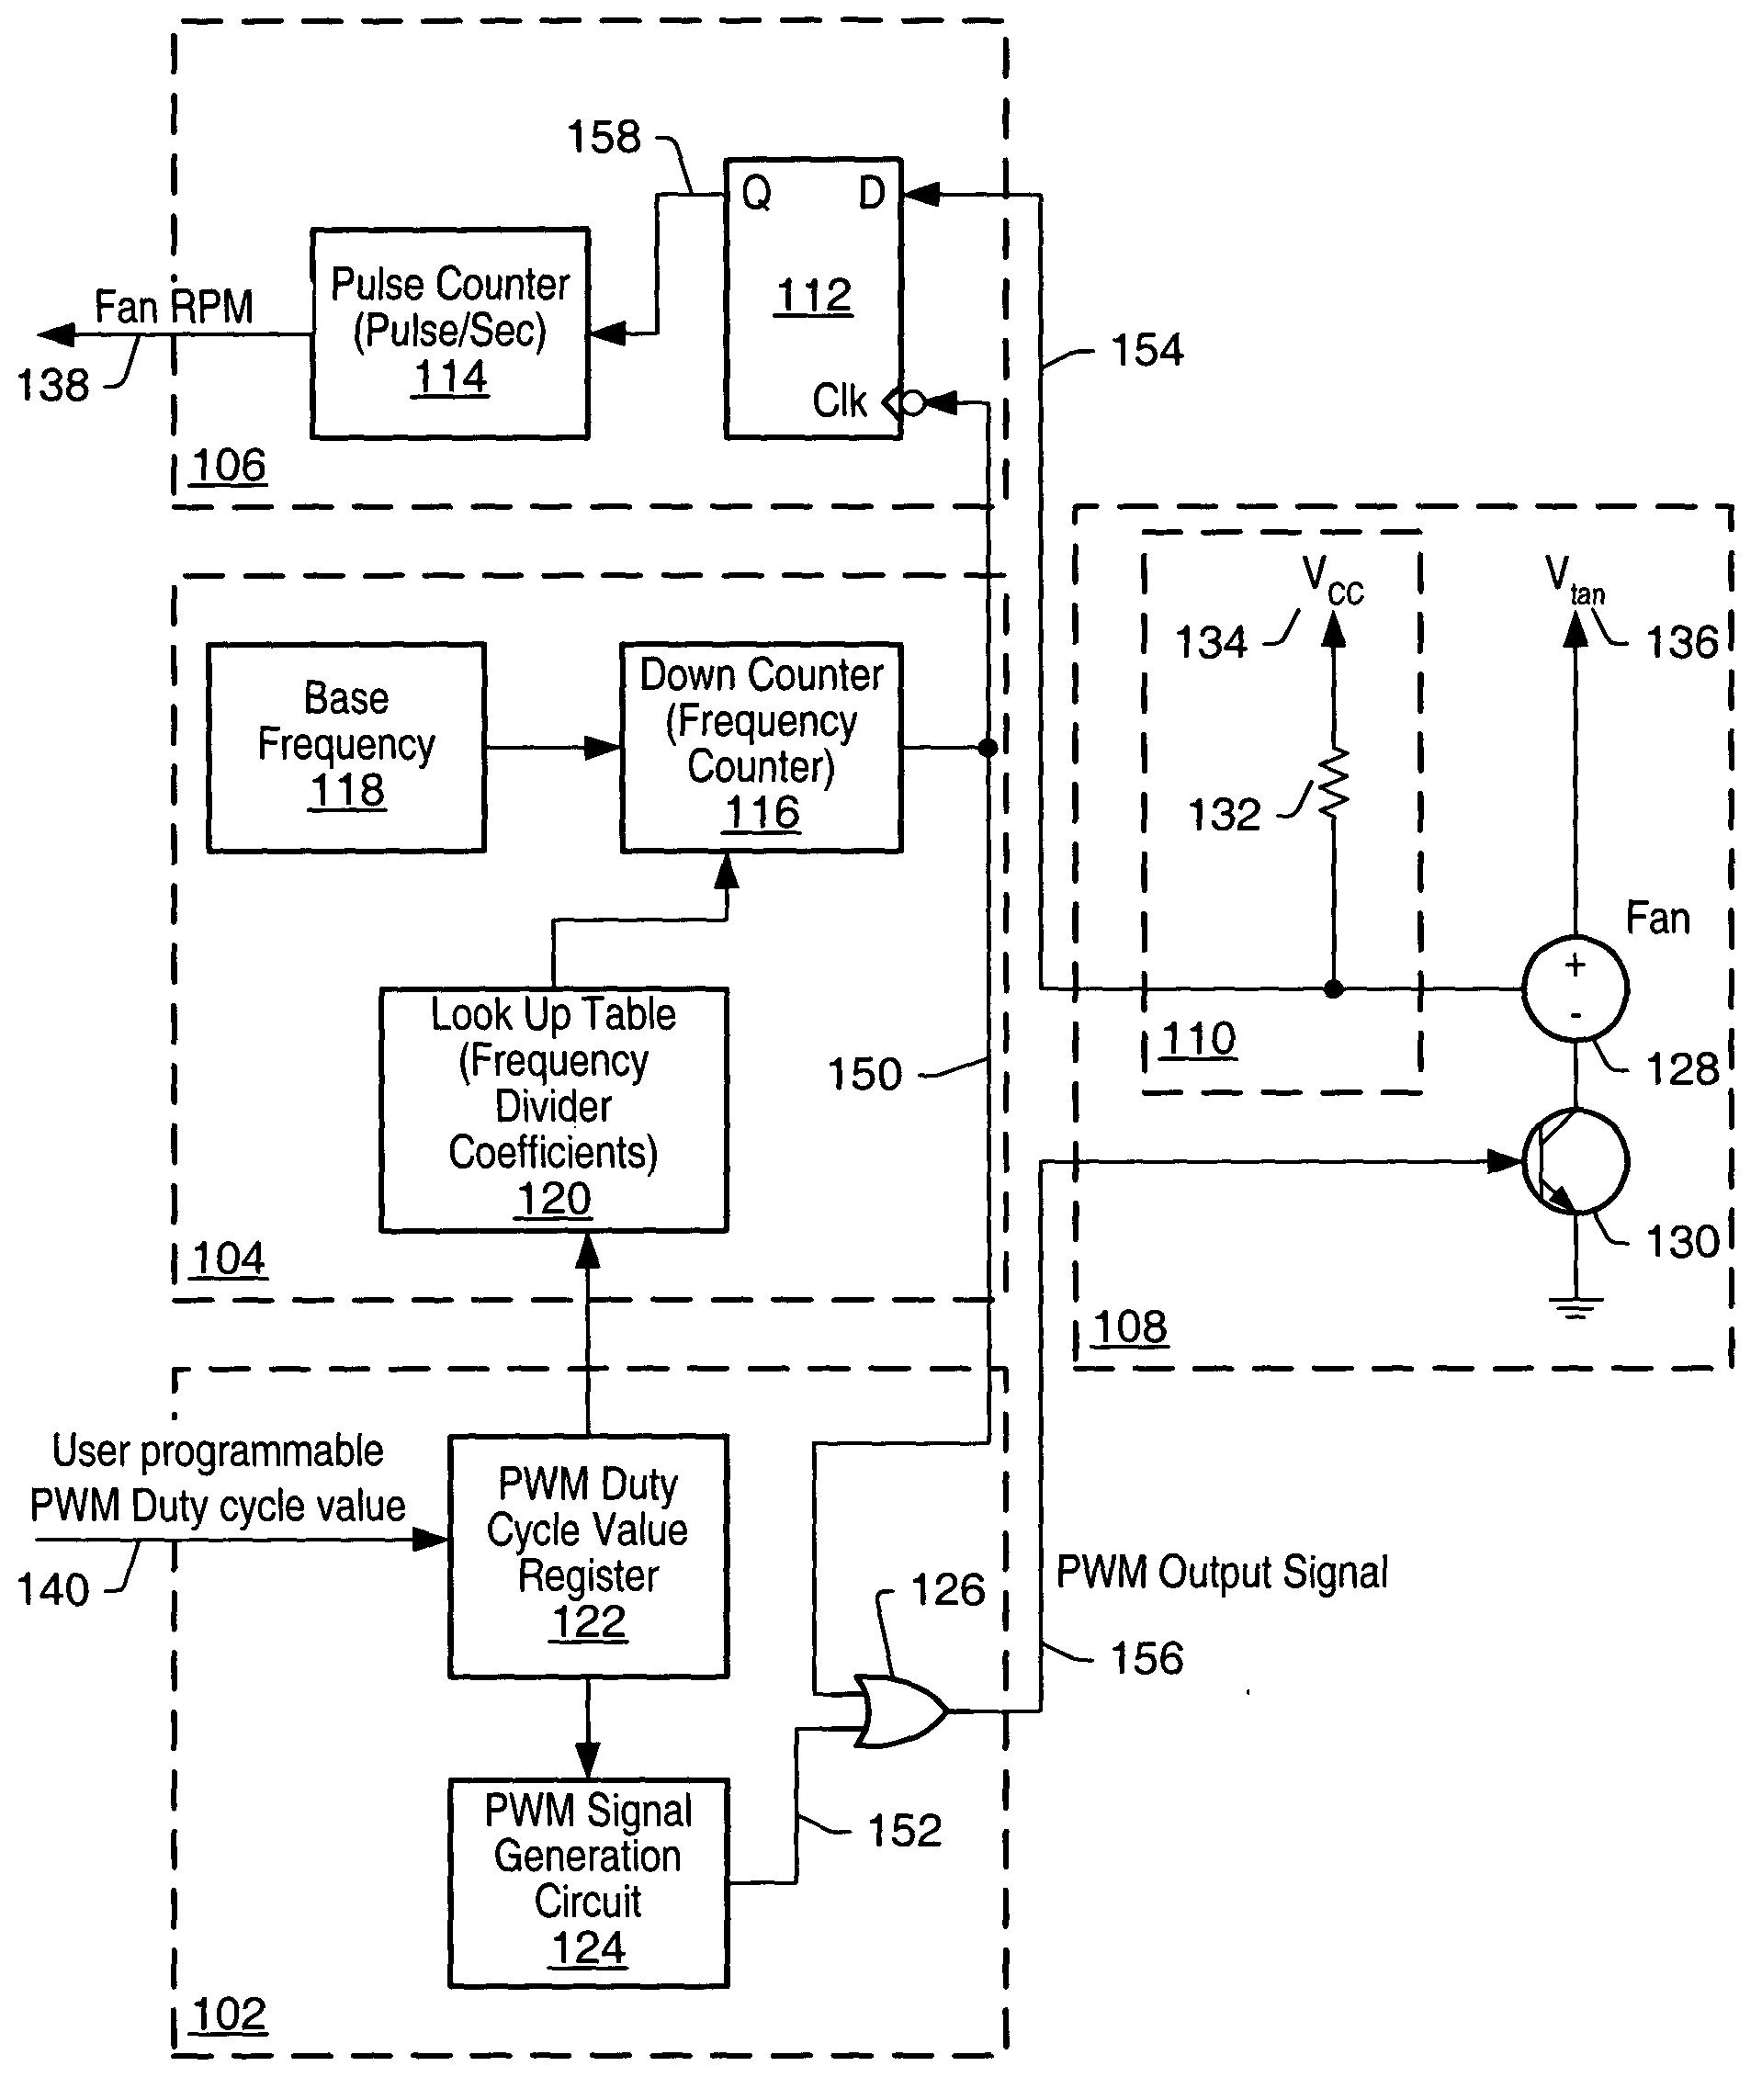 Method and apparatus for generating accurate fan tachometer readings